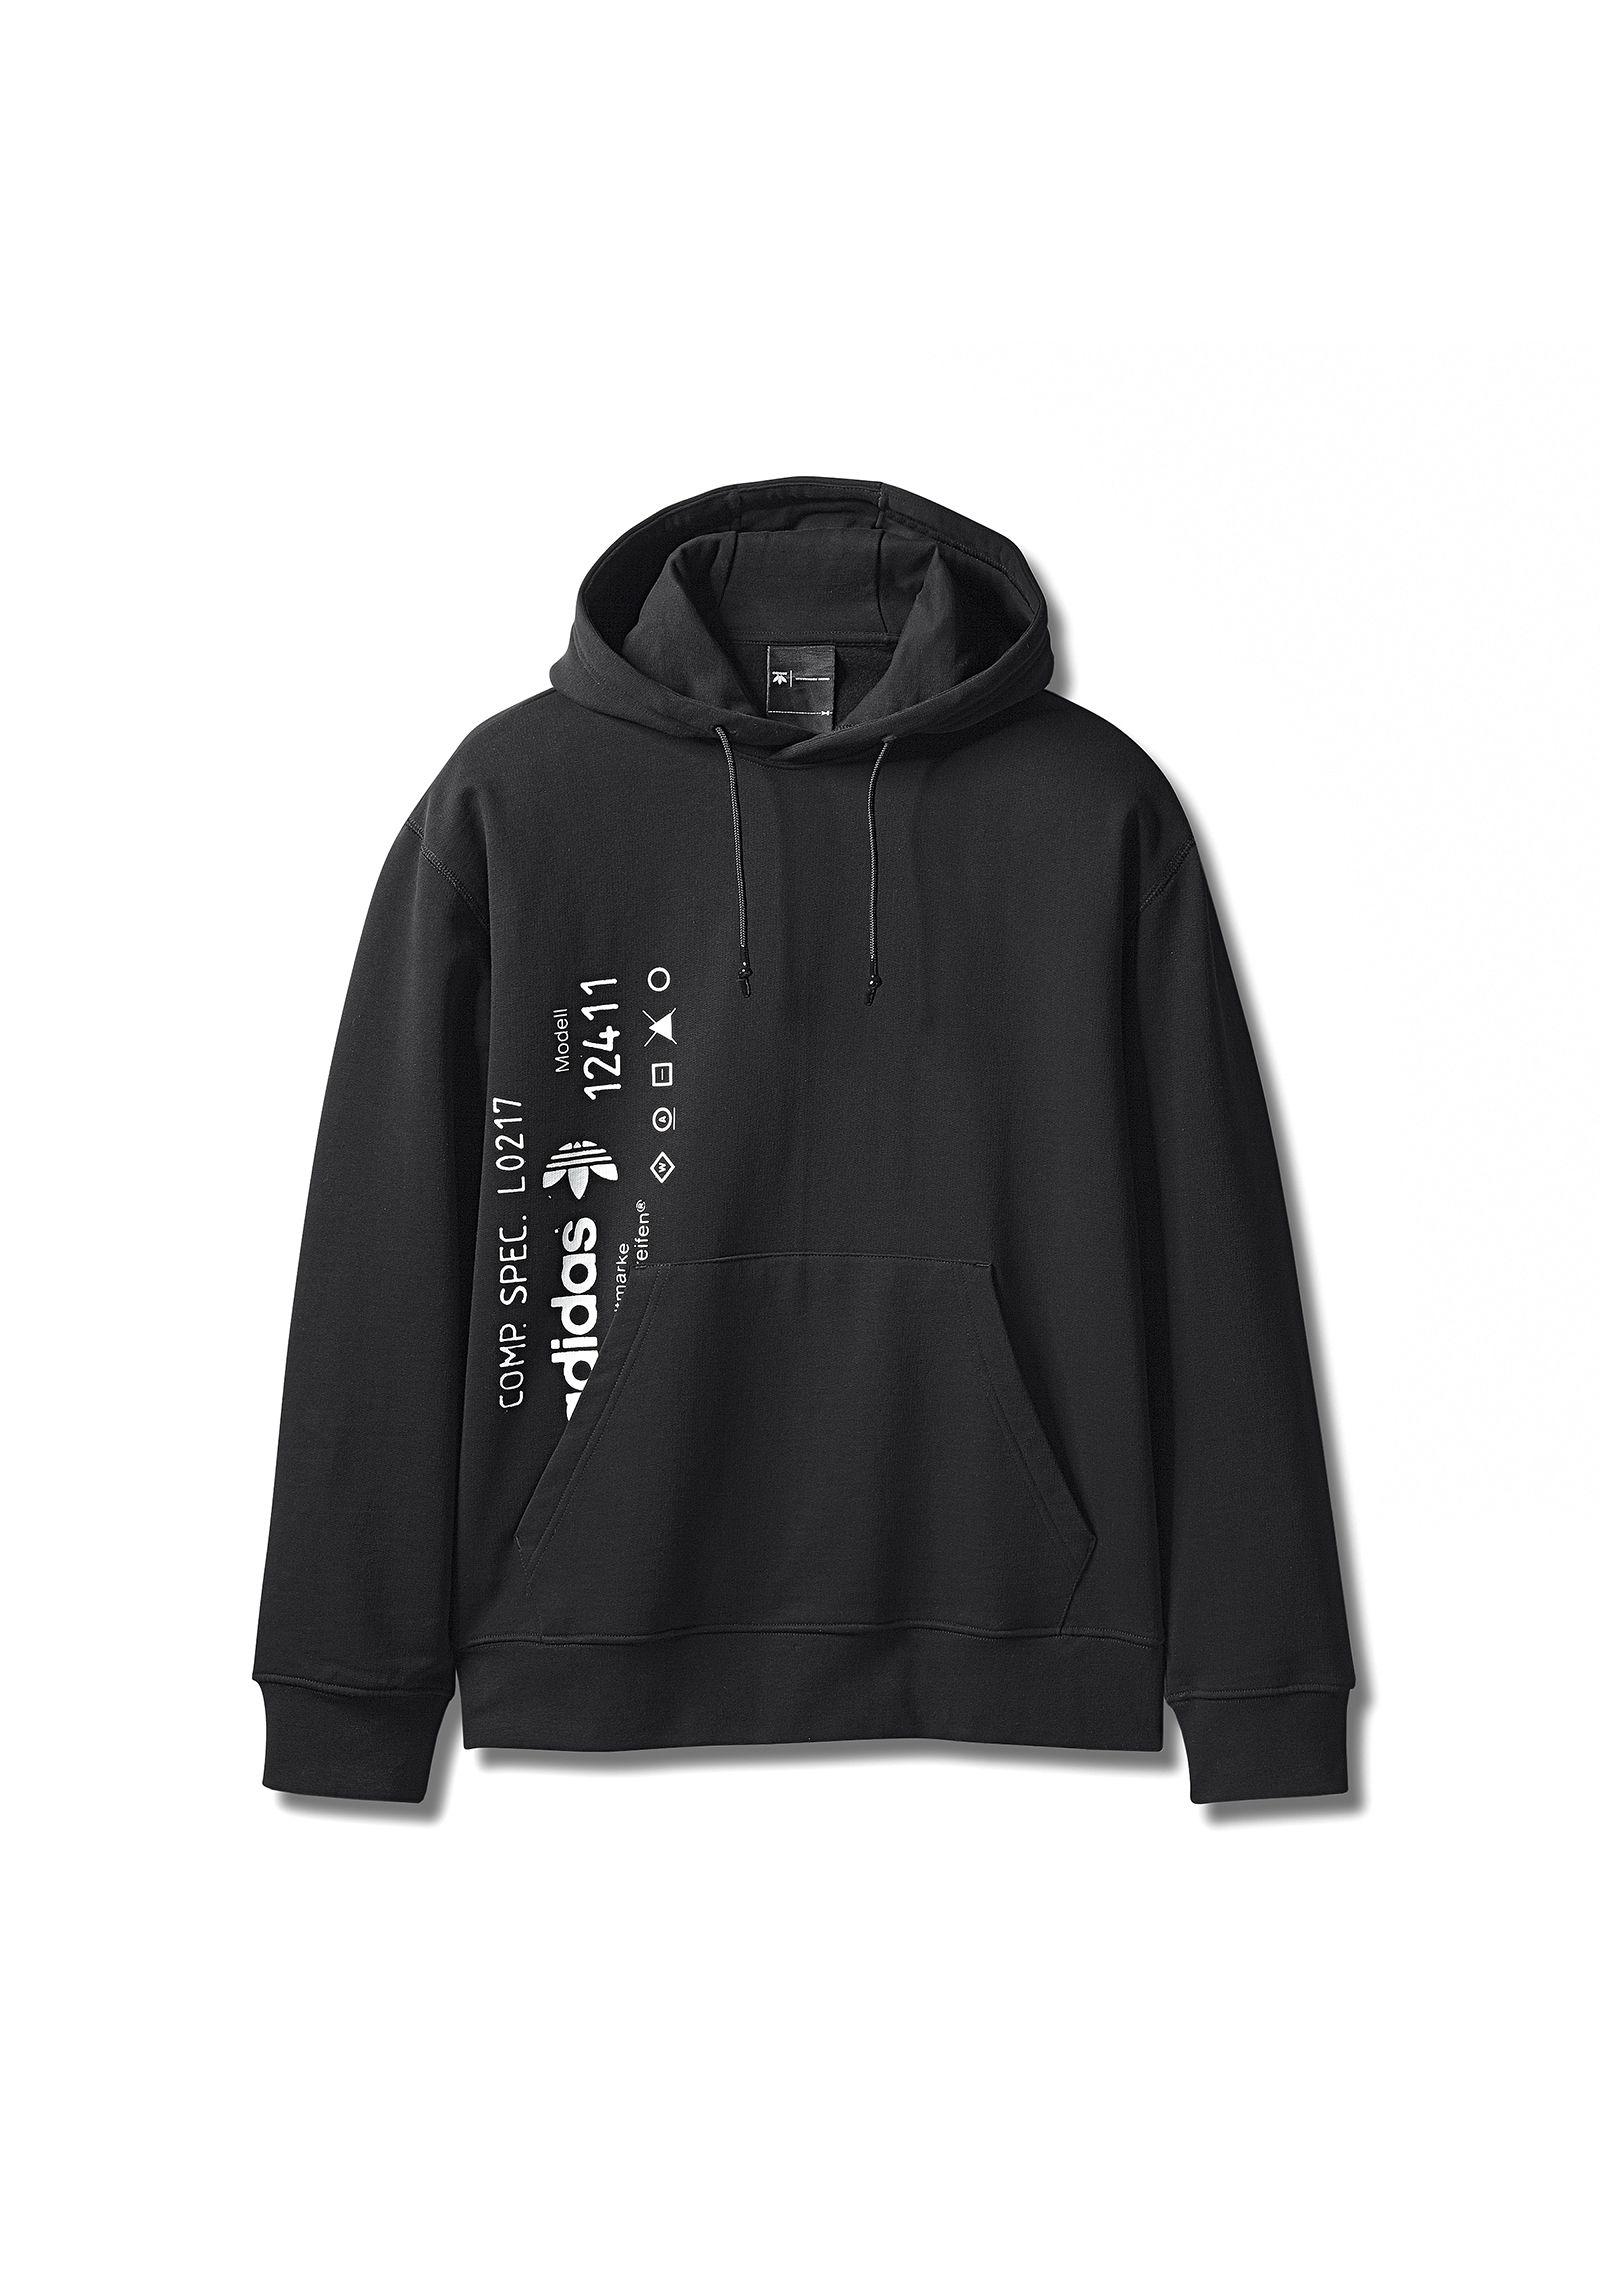 Alexander Wang Cotton Adidas Originals By Aw Graphic Hoodie in Black for  Men - Lyst